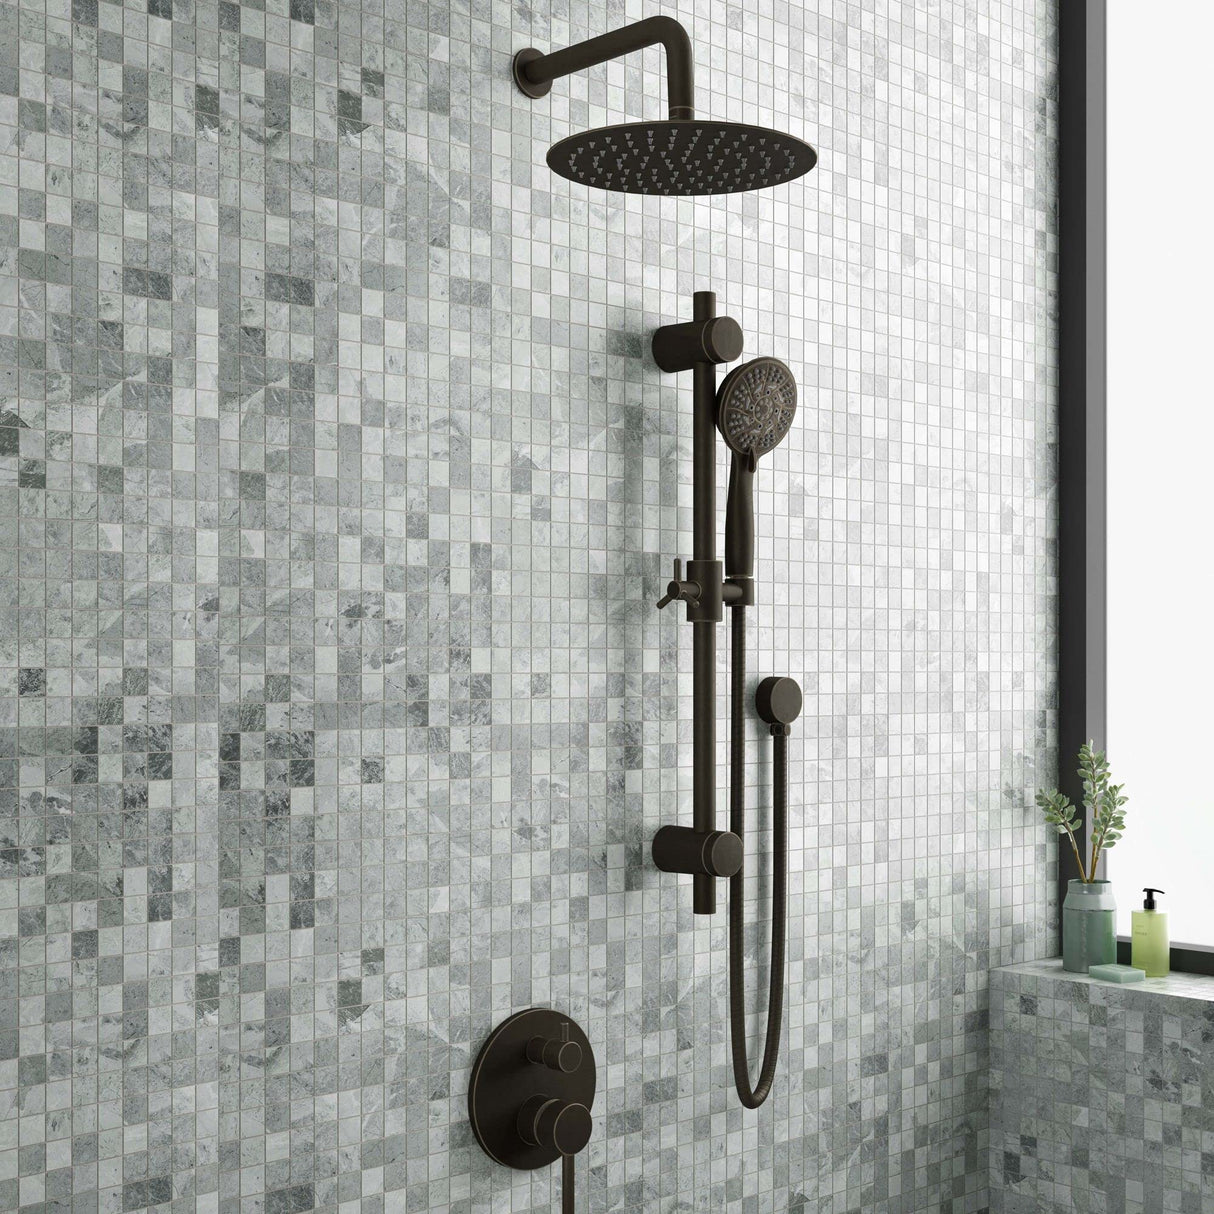 PULSE ShowerSpas 3006-ORB-1.8GPM Oil-Rubbed Bronze Combo Shower System, 1.8 GPM